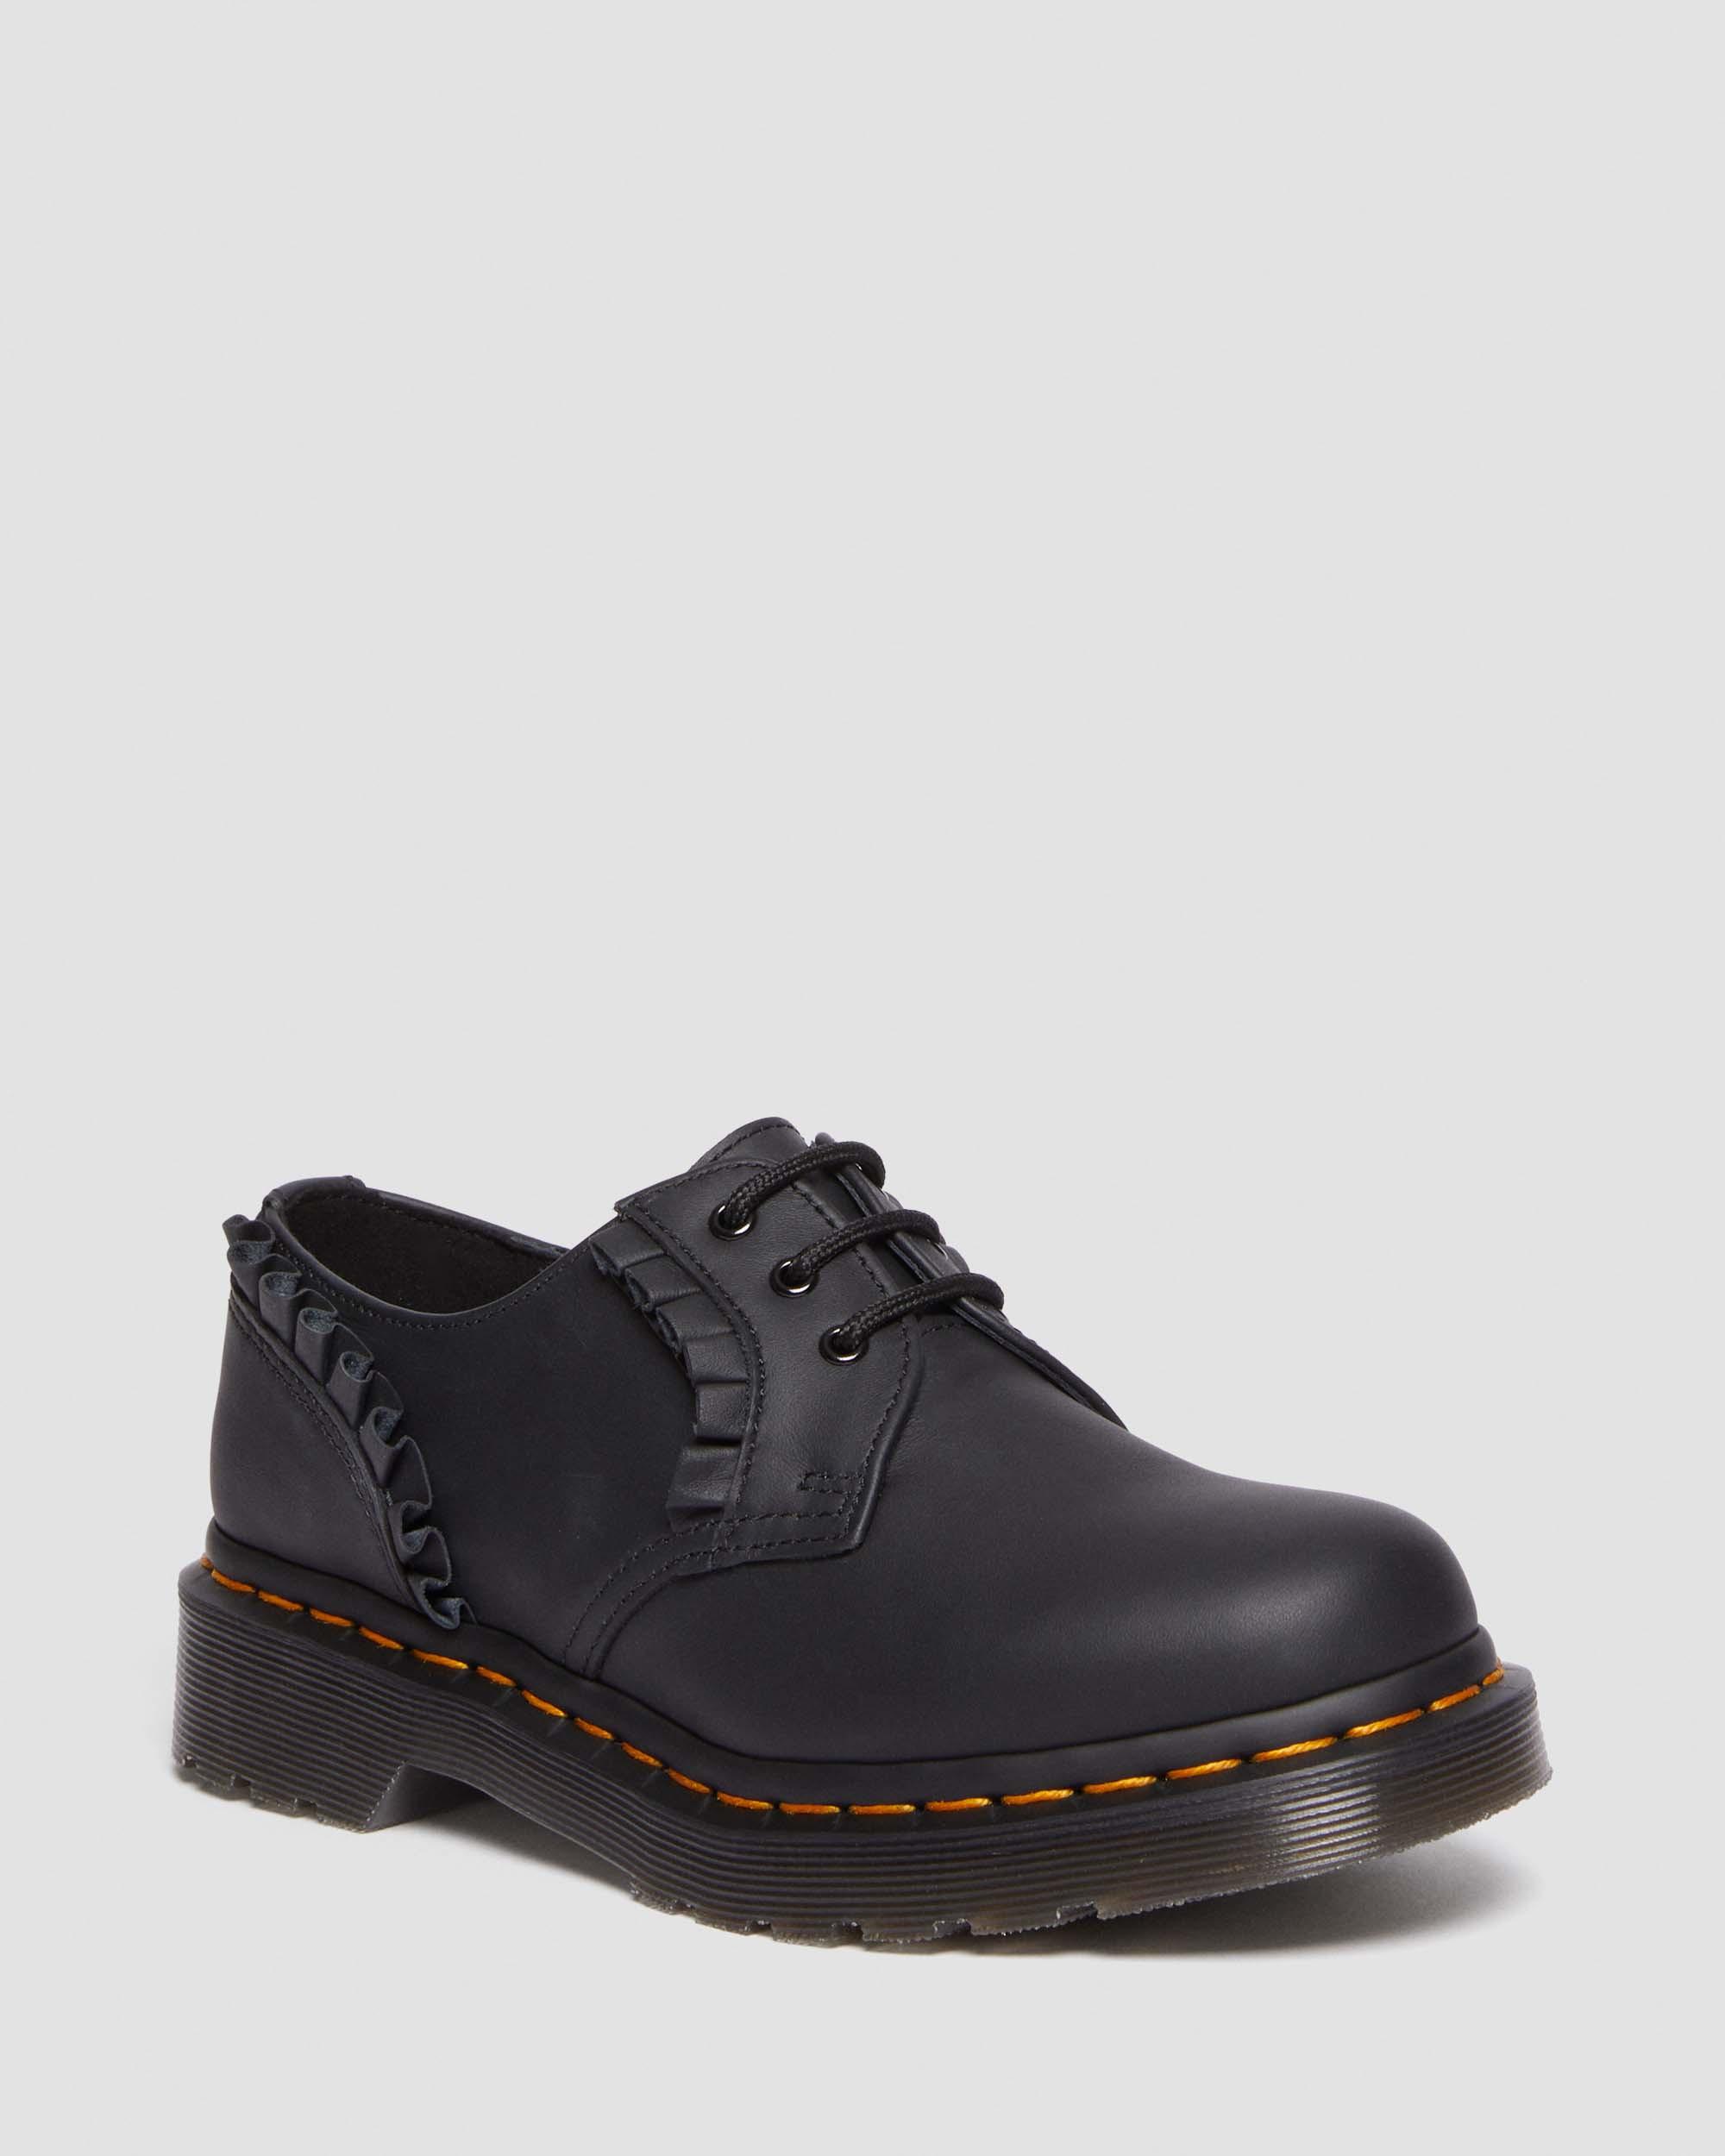 Dr. Martens' 1461 Women's Frill Nappa Leather Oxford Shoes In Black